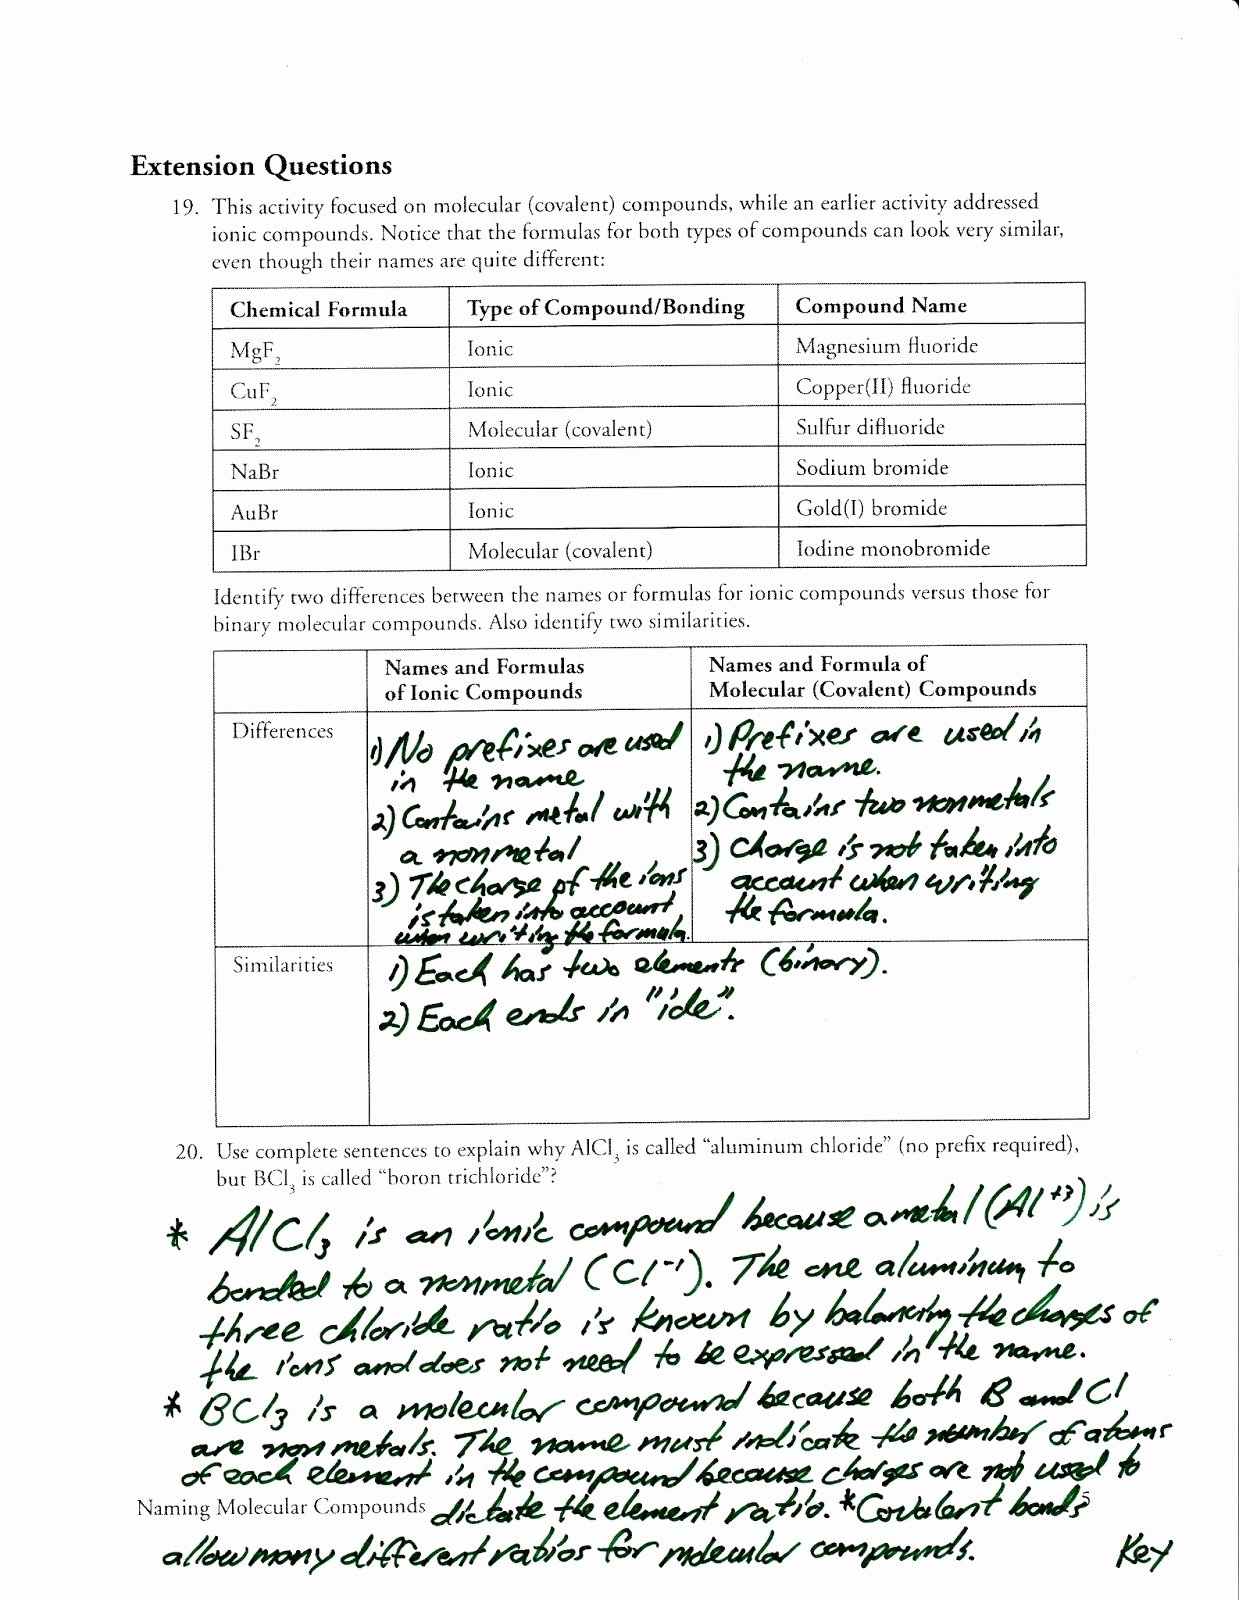 Molecular Compounds Worksheet  Soccerphysicsonline Together With Naming Molecular Compounds Worksheet Answers